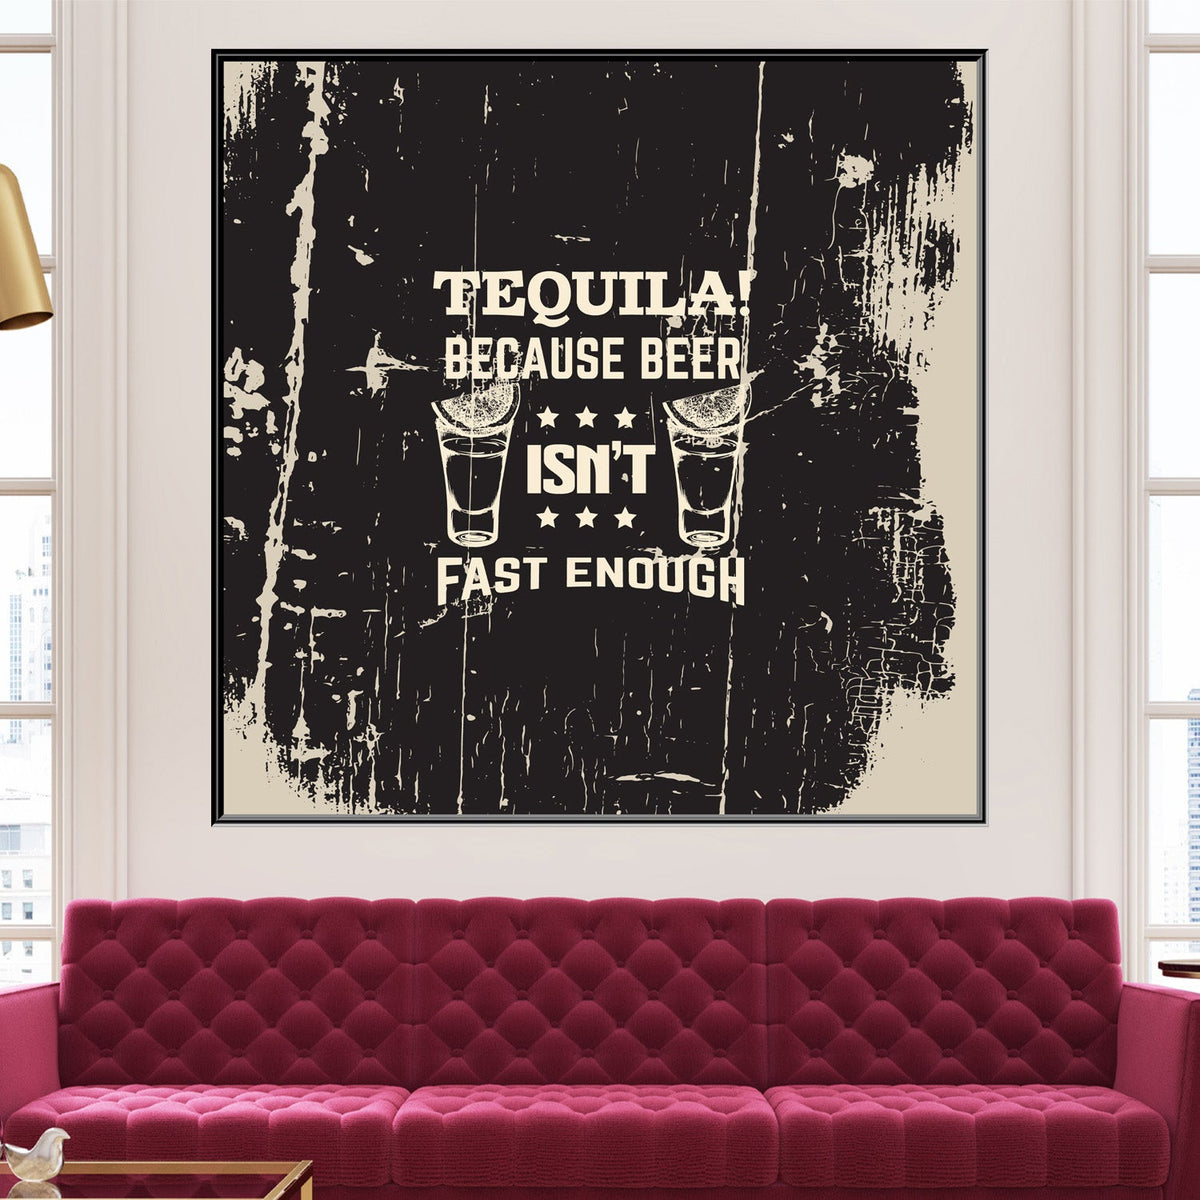 https://cdn.shopify.com/s/files/1/0387/9986/8044/products/TequilaBecauseCanvasArtprintFloatingFrame-1.jpg